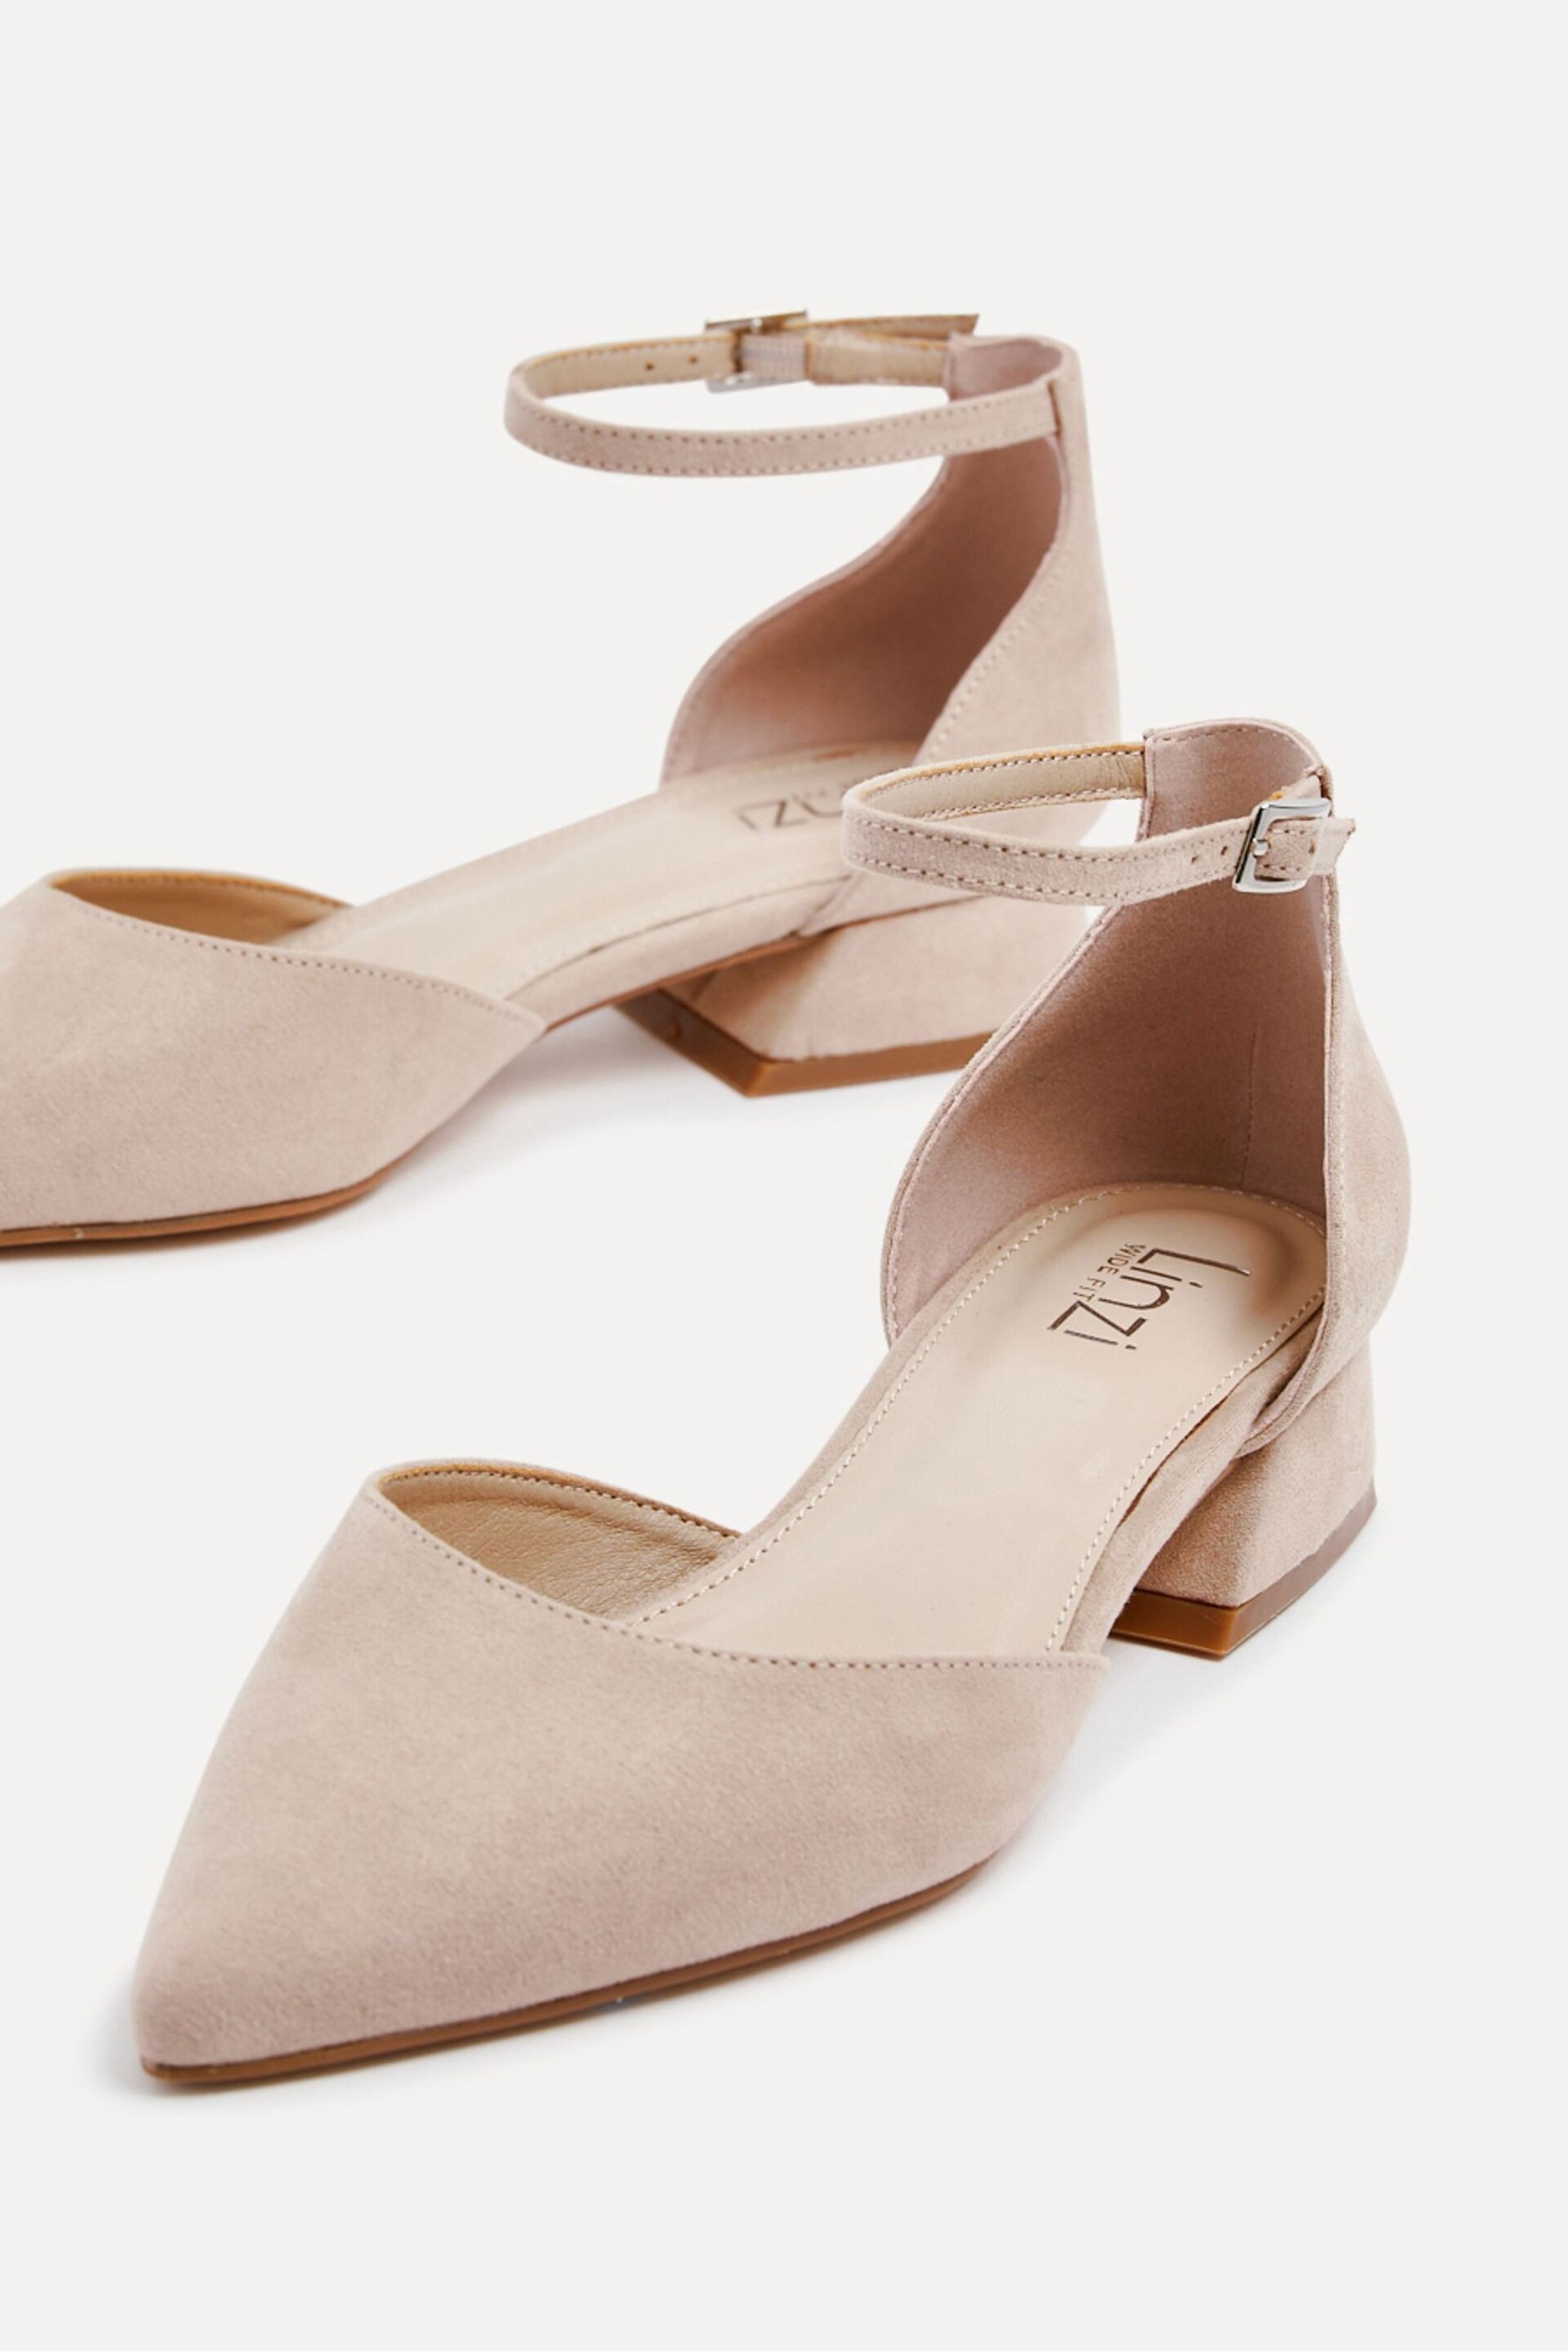 Linzi Nude Dolly Wide Fit Low Block Court Heels - Image 5 of 5